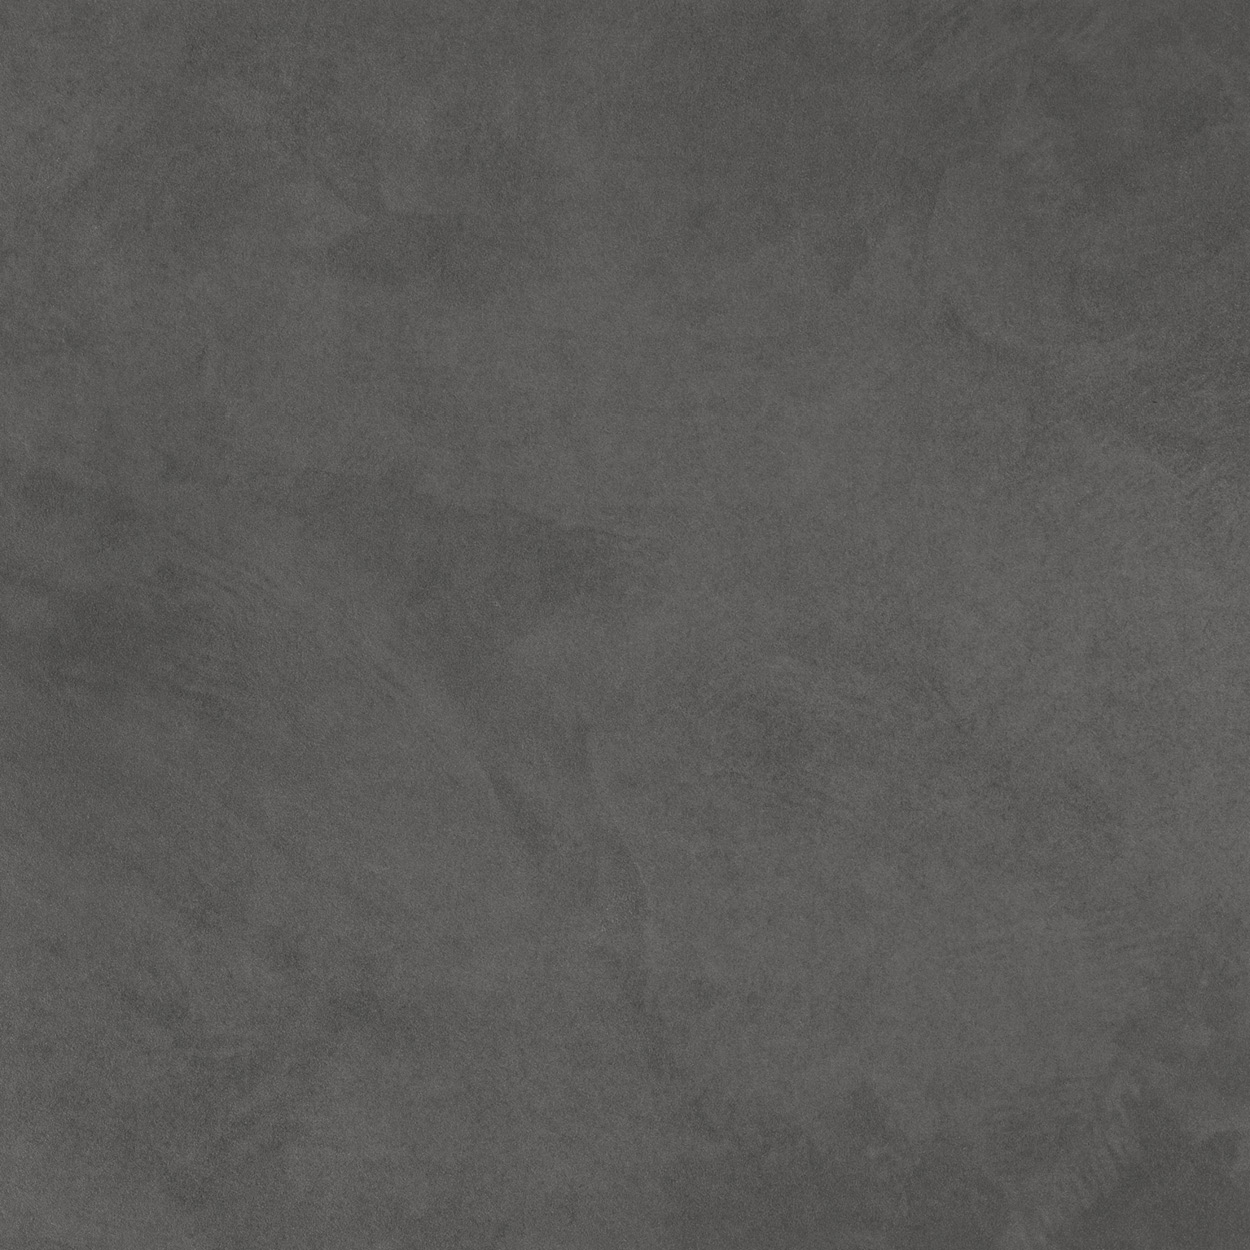 32 x 32 Seamless CL_03 Porcelain tile (SPECIAL ORDER ONLY)